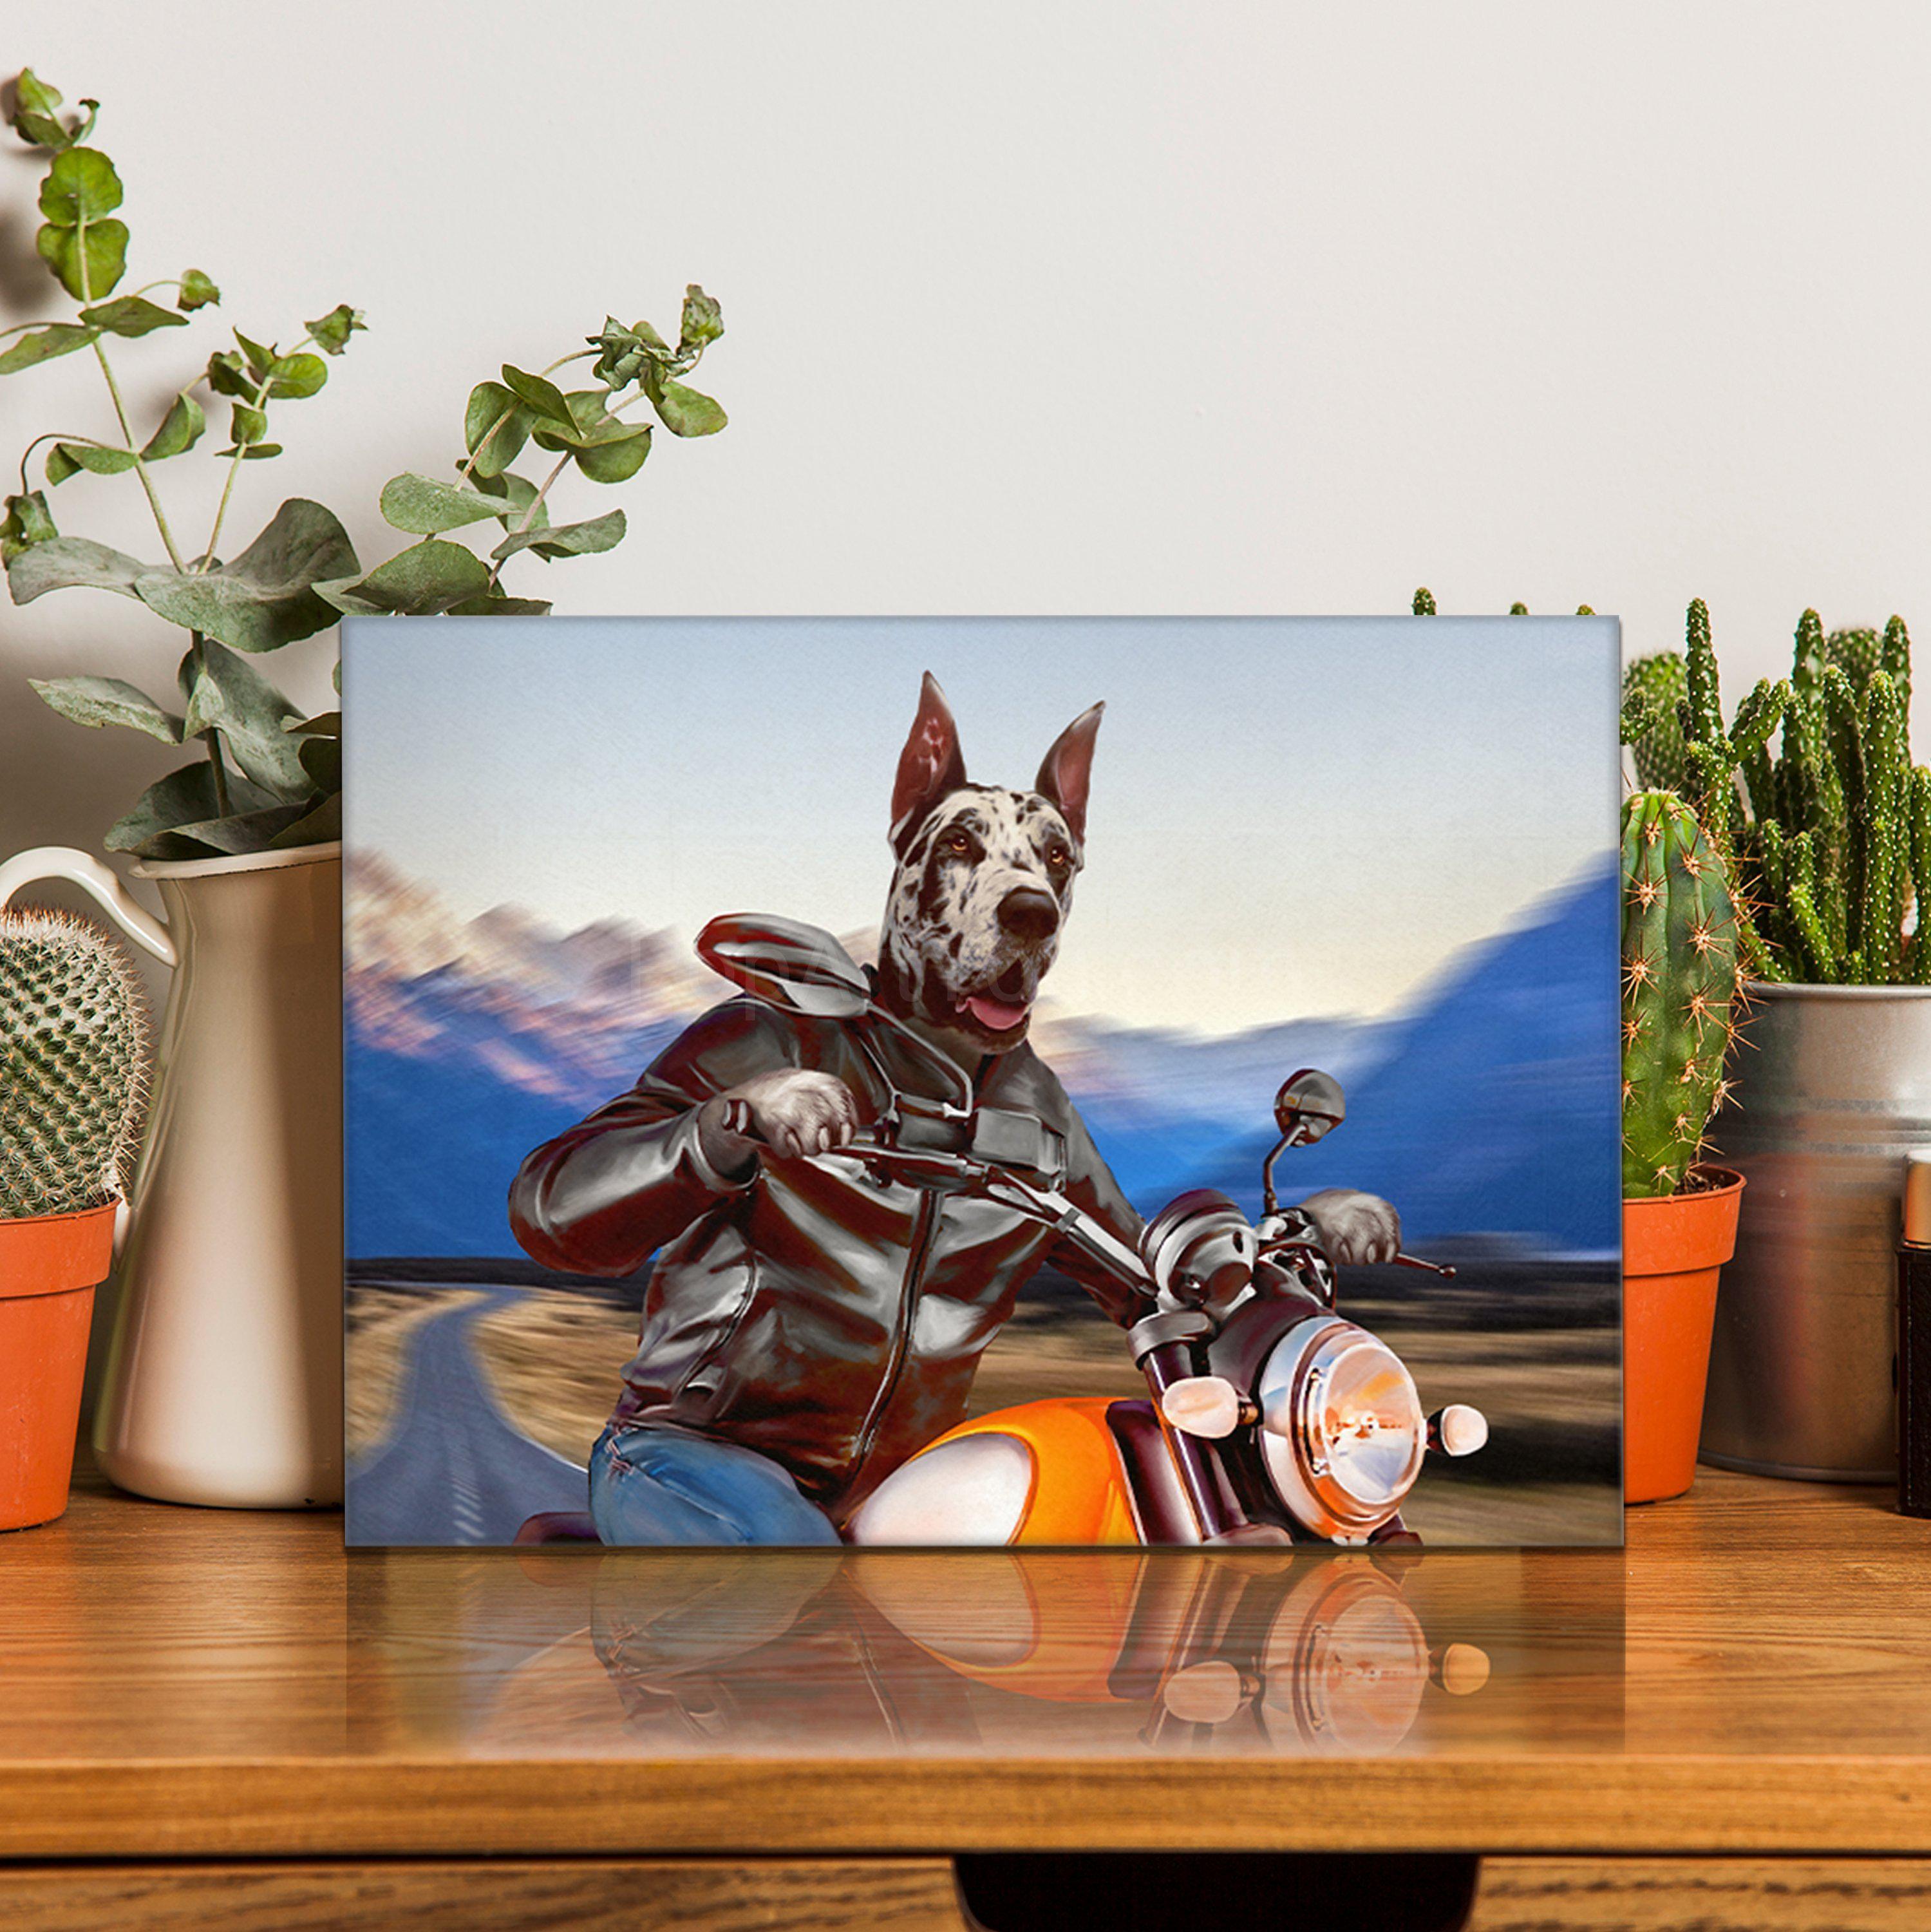 Portrait of a biker dog with a human body riding a motorcycle stands on a wooden table near cacti